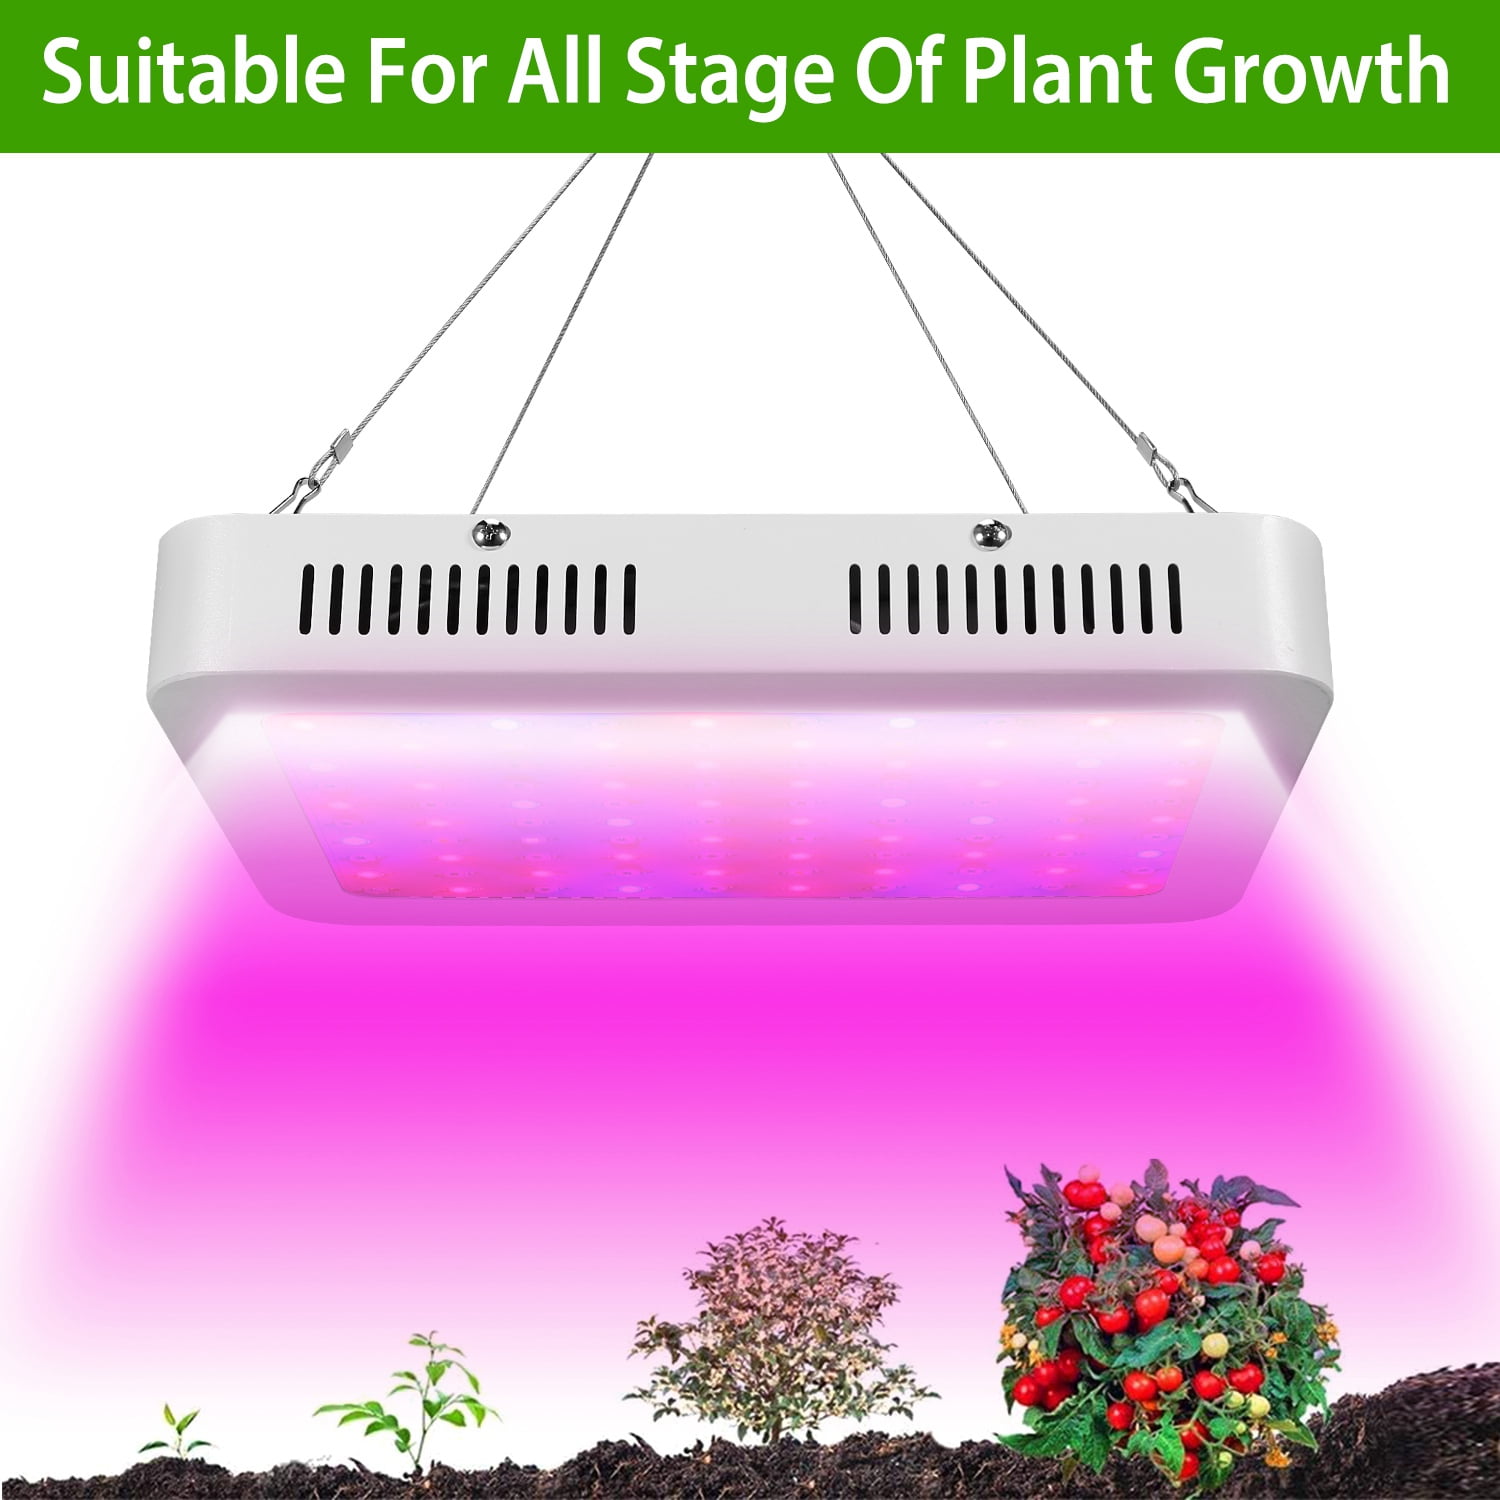  Aidyu 1000W LED Grow Light, Full Spectrum Growing Lamps for  Indoor Hydroponic Greenhouse Plants with Veg and Bloom Switch, Dual Chips,  UV & IR, Adjustable Rope Hanger : Patio, Lawn 